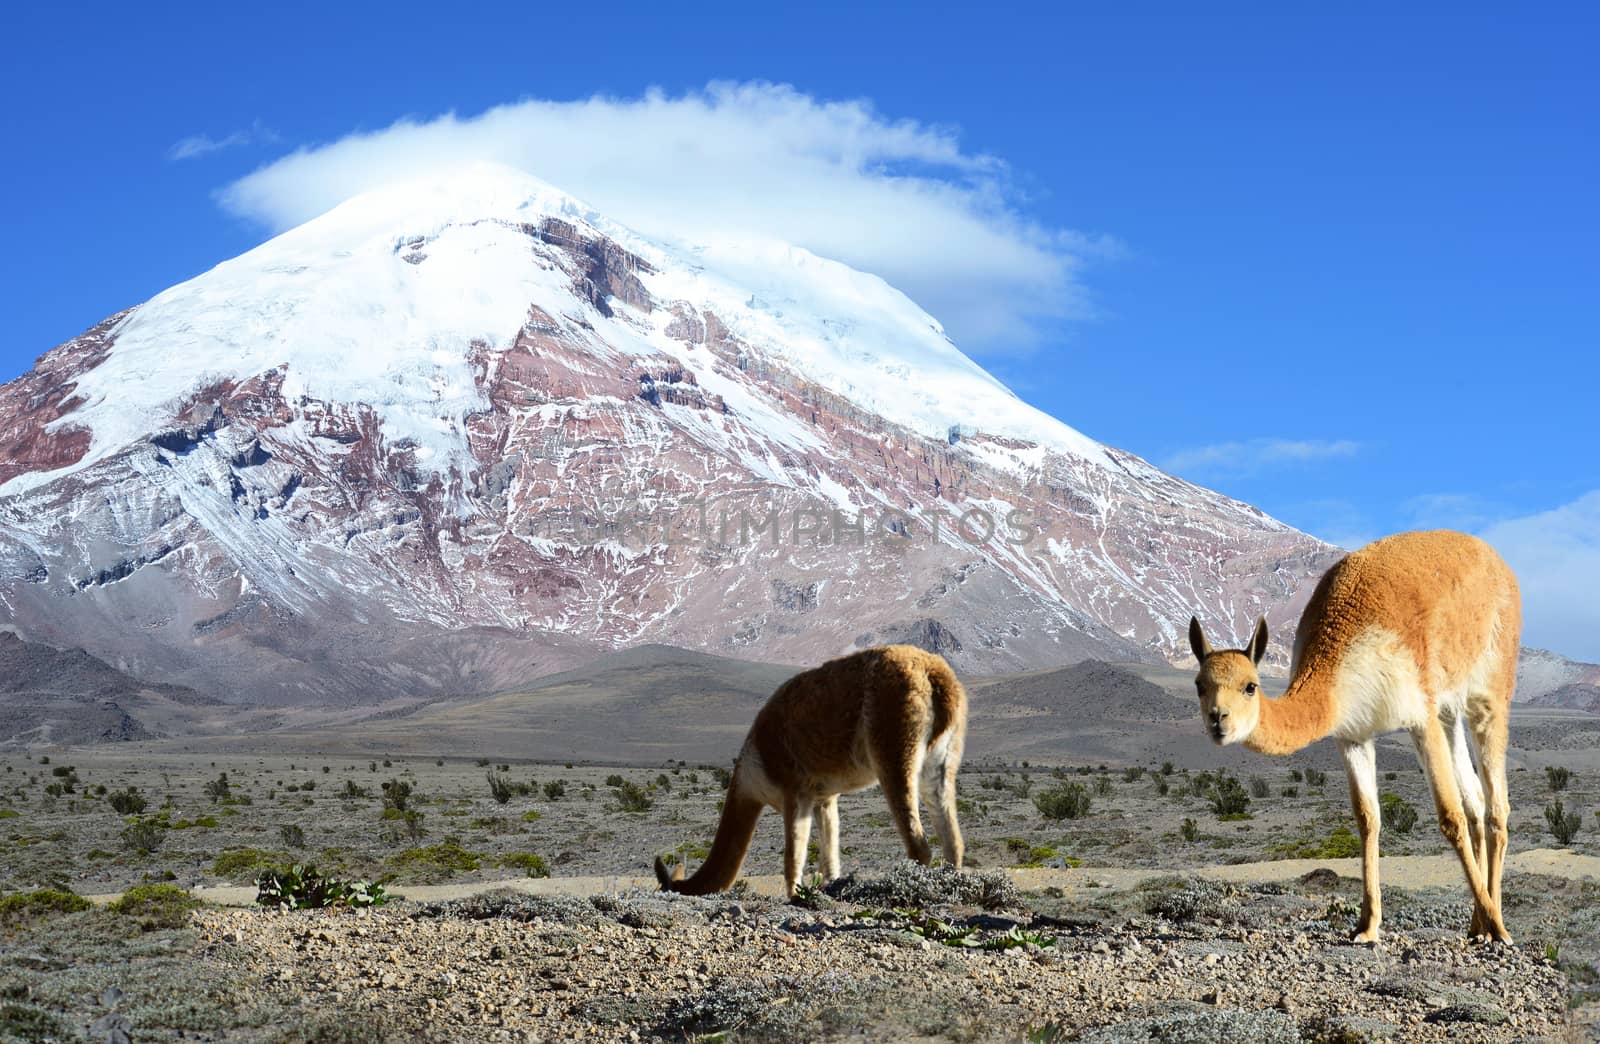 Vicu��a (Vicugna vicugna) or vicugna is wild South American camelid, which live in the high alpine areas of the Andes. It is a relative of the llama. It is understood that the Inca valued vicu��as for their wool.
The vicu��a is the national animal of Peru and Bolivia.
The photo was taken on the road through the Andes near the inactive stratovolcano Chimborazo, in the Cordillera Occidental of the Andes of central Ecuador.